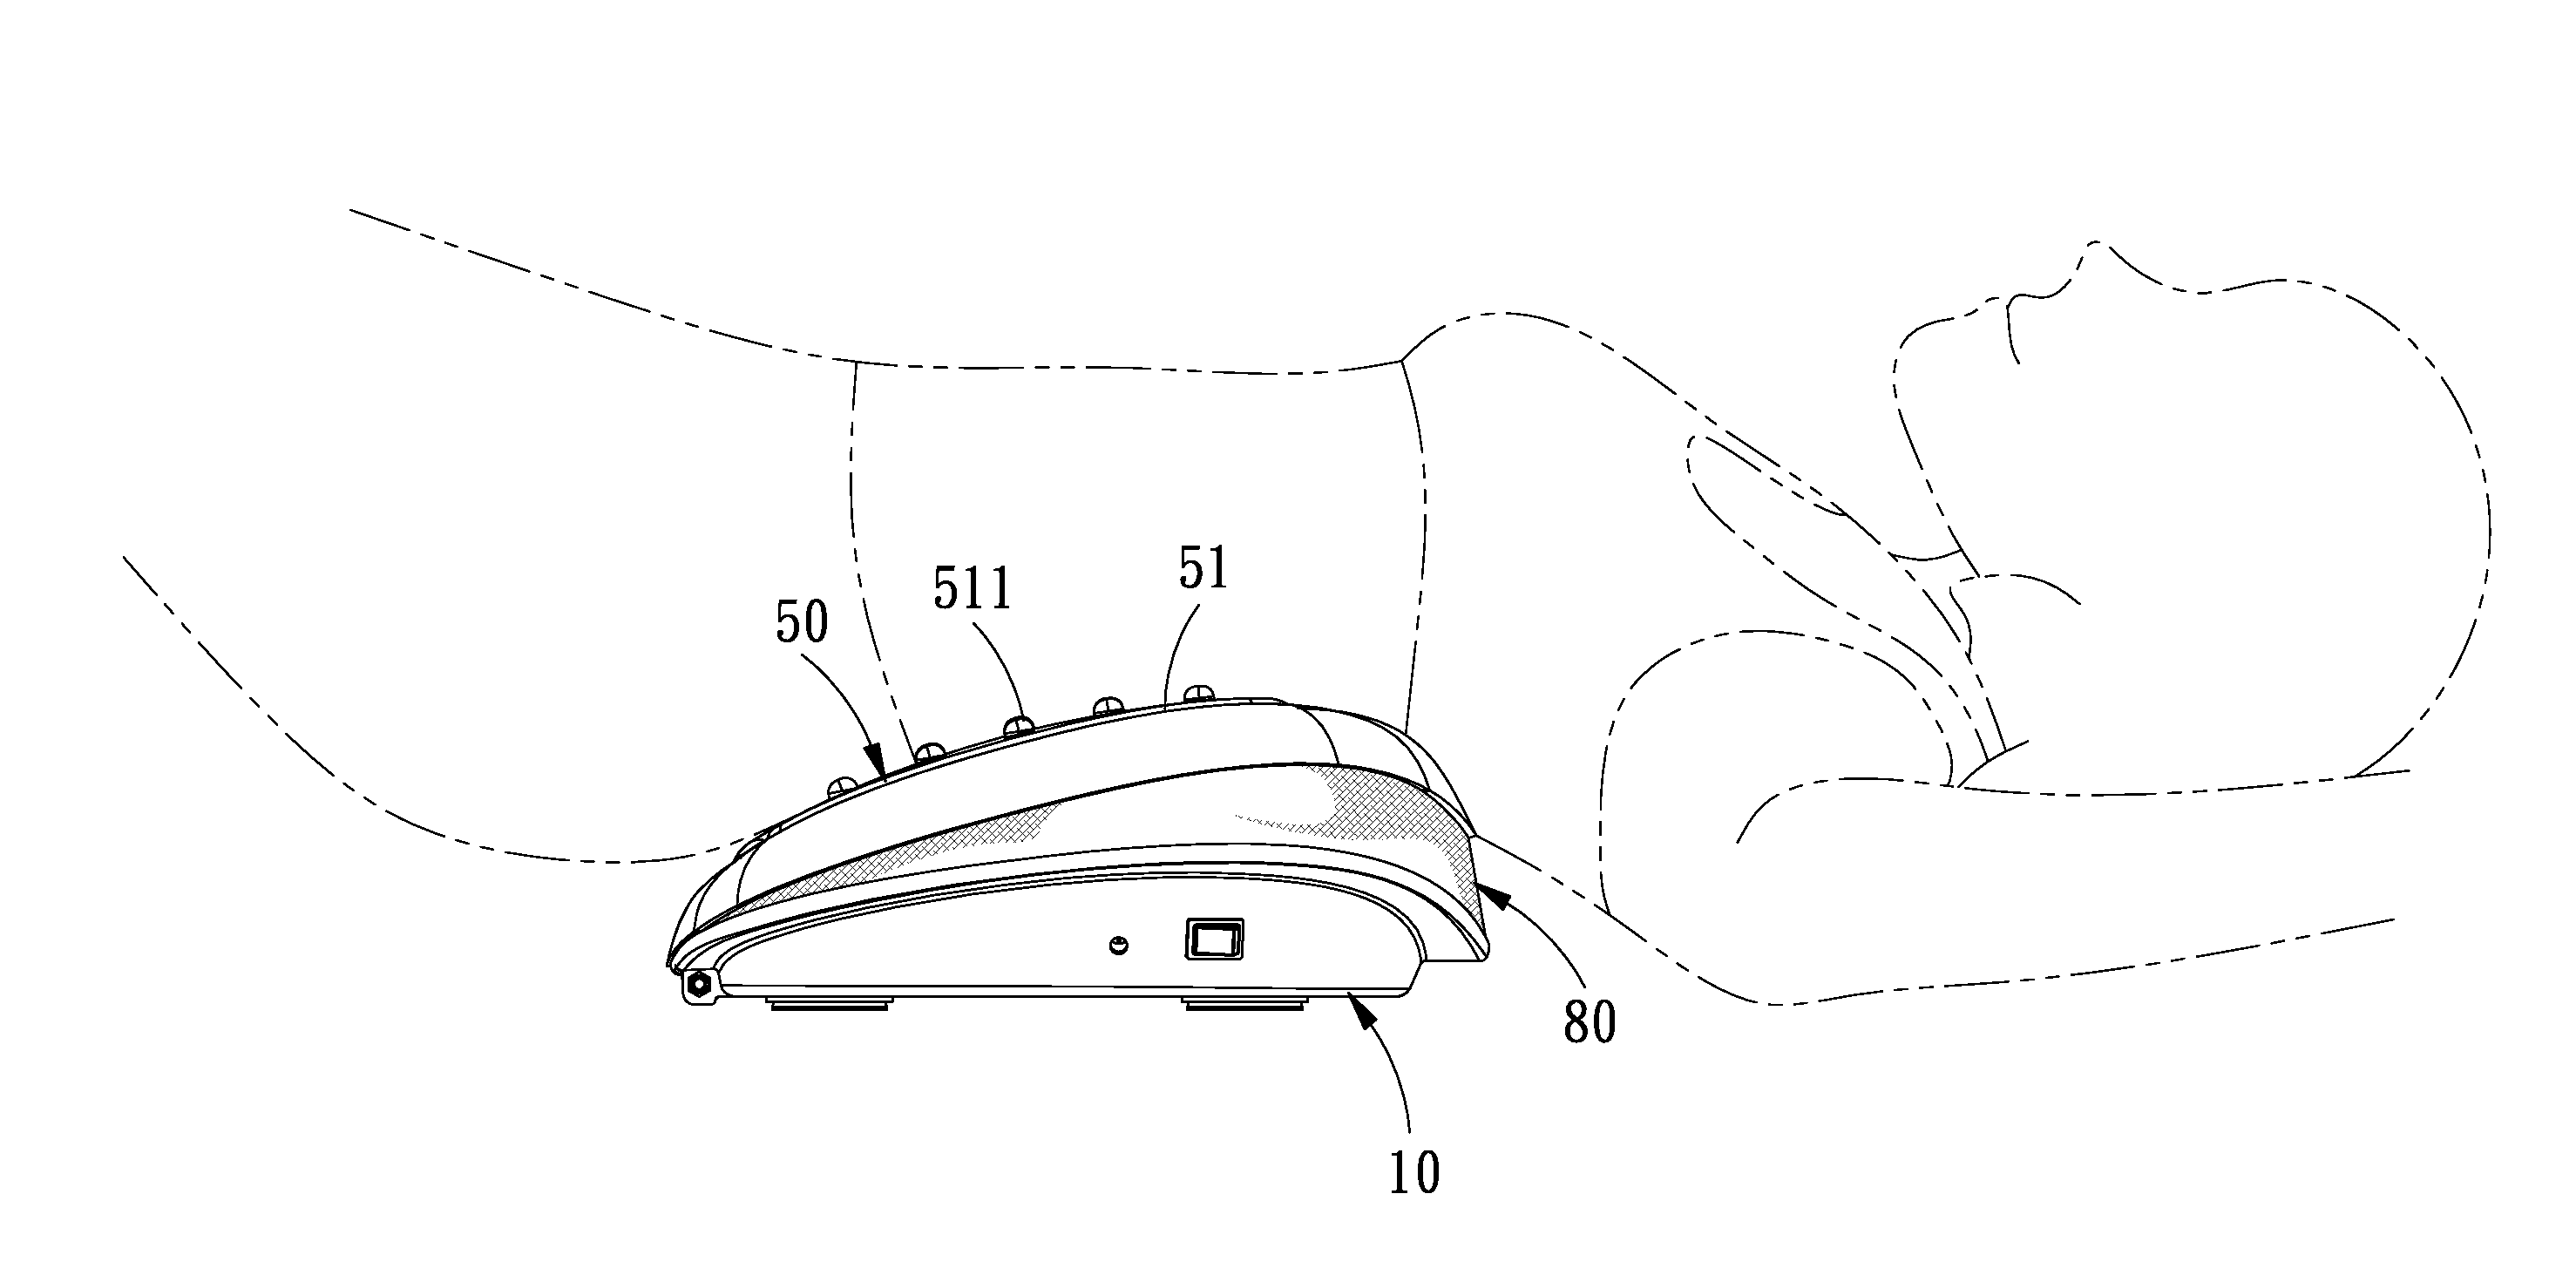 Muscle stretching device